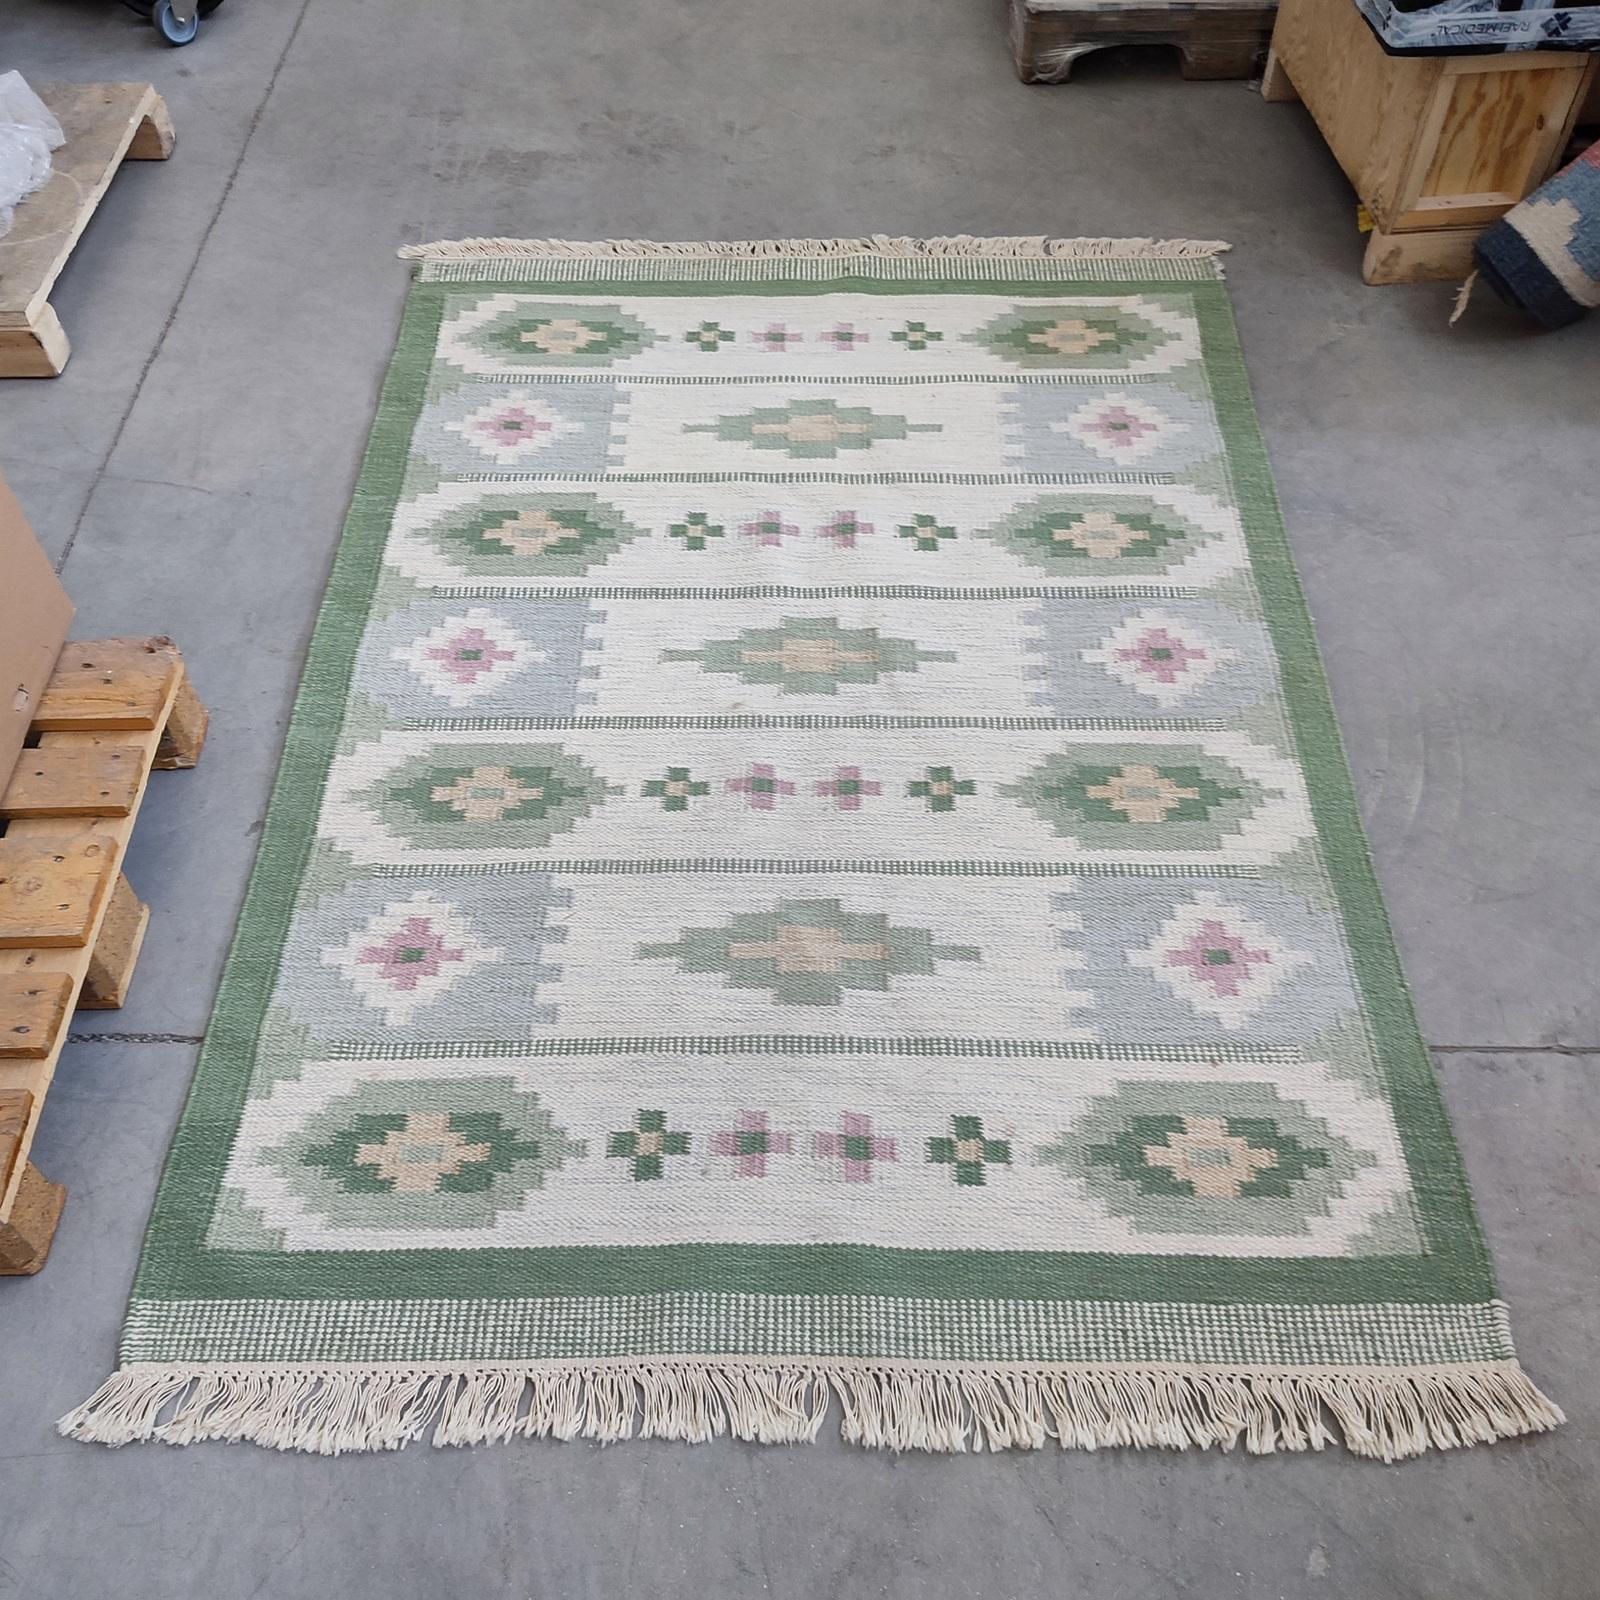 Vintage Swedish Kilim Rölakan Geometric Design Pattern, Sweden 1980s.
Genuine Röllakan made of wool, hand-woven, the light green field features an all-over geometric pattern composed of smaller stepped star motifs in soft shades of pink, beige, and